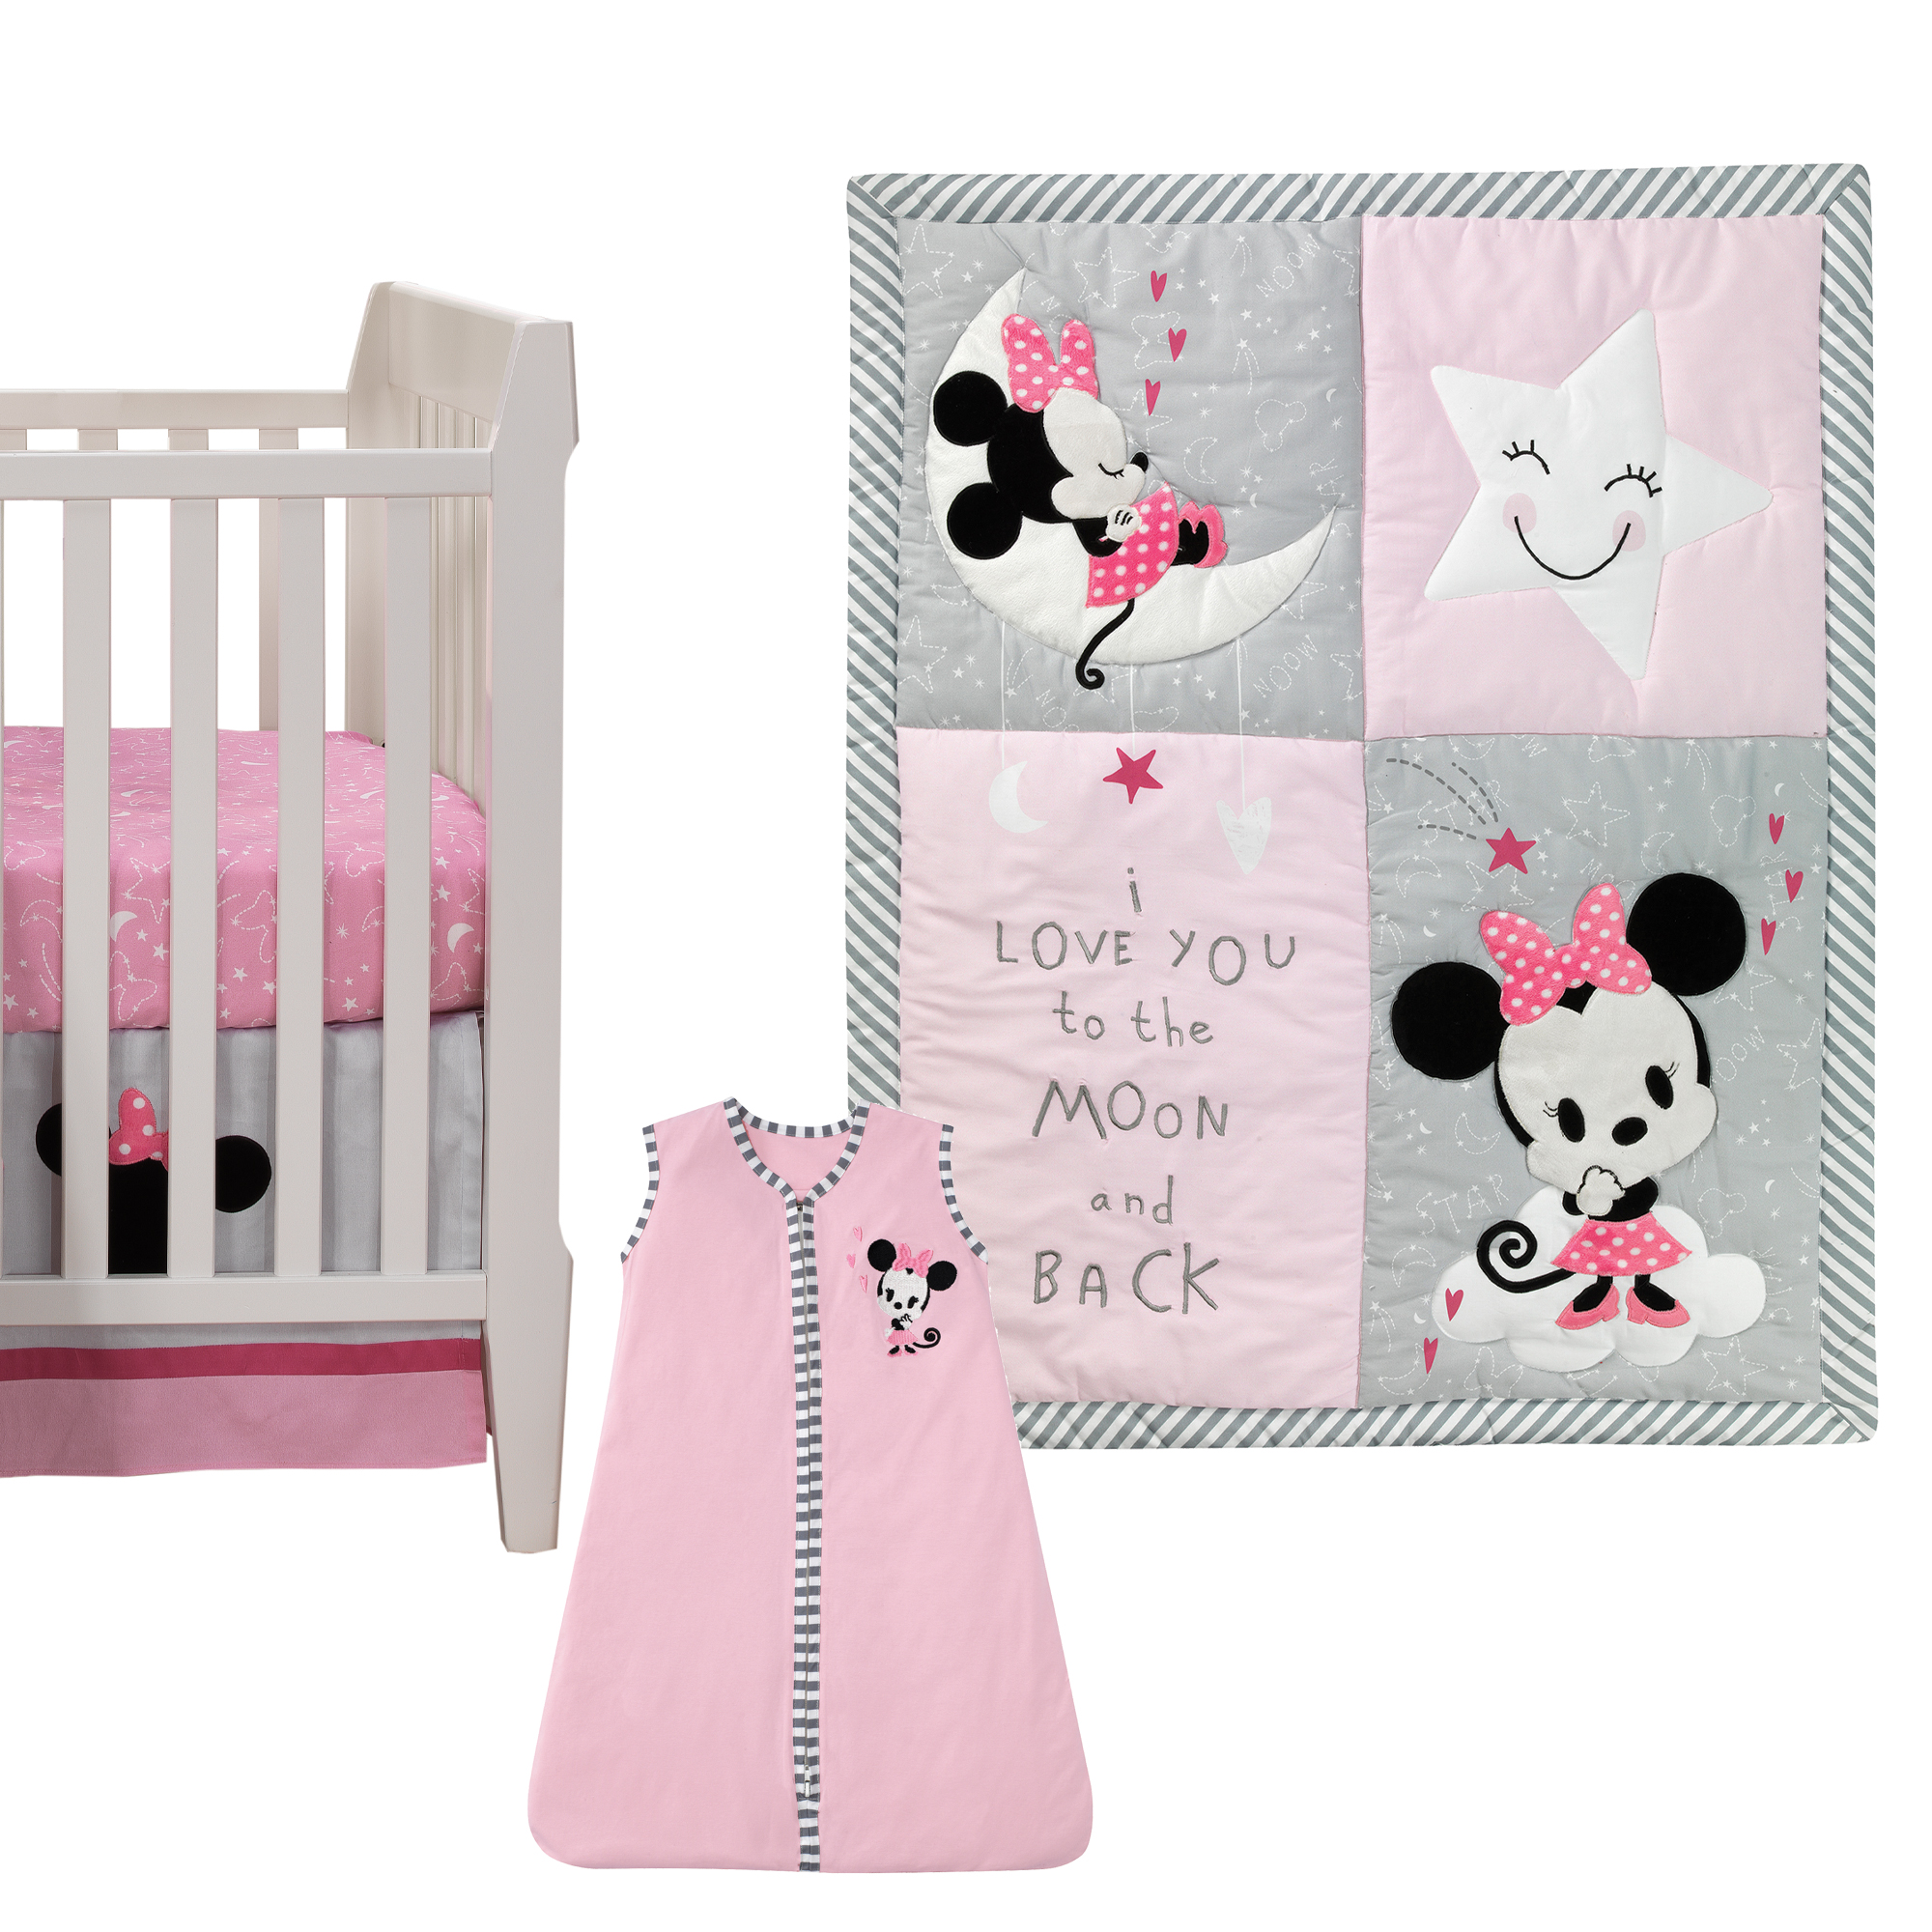 Disney Baby Minnie Mouse Pink 4-Piece Nursery Crib Bedding Set by Lambs & Ivy - image 1 of 8